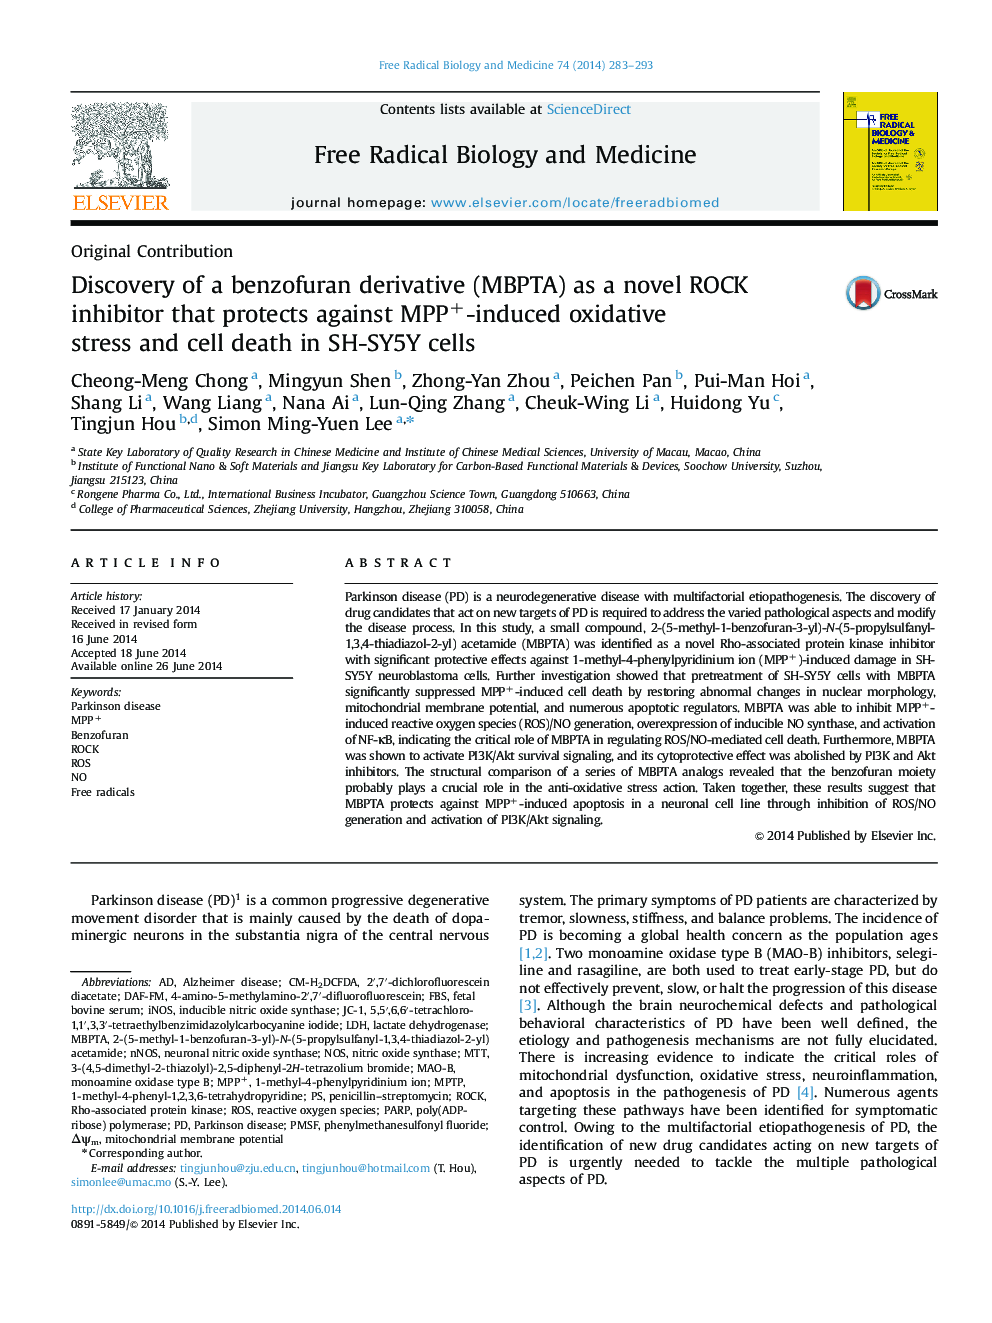 Discovery of a benzofuran derivative (MBPTA) as a novel ROCK inhibitor that protects against MPP+-induced oxidative stress and cell death in SH-SY5Y cells